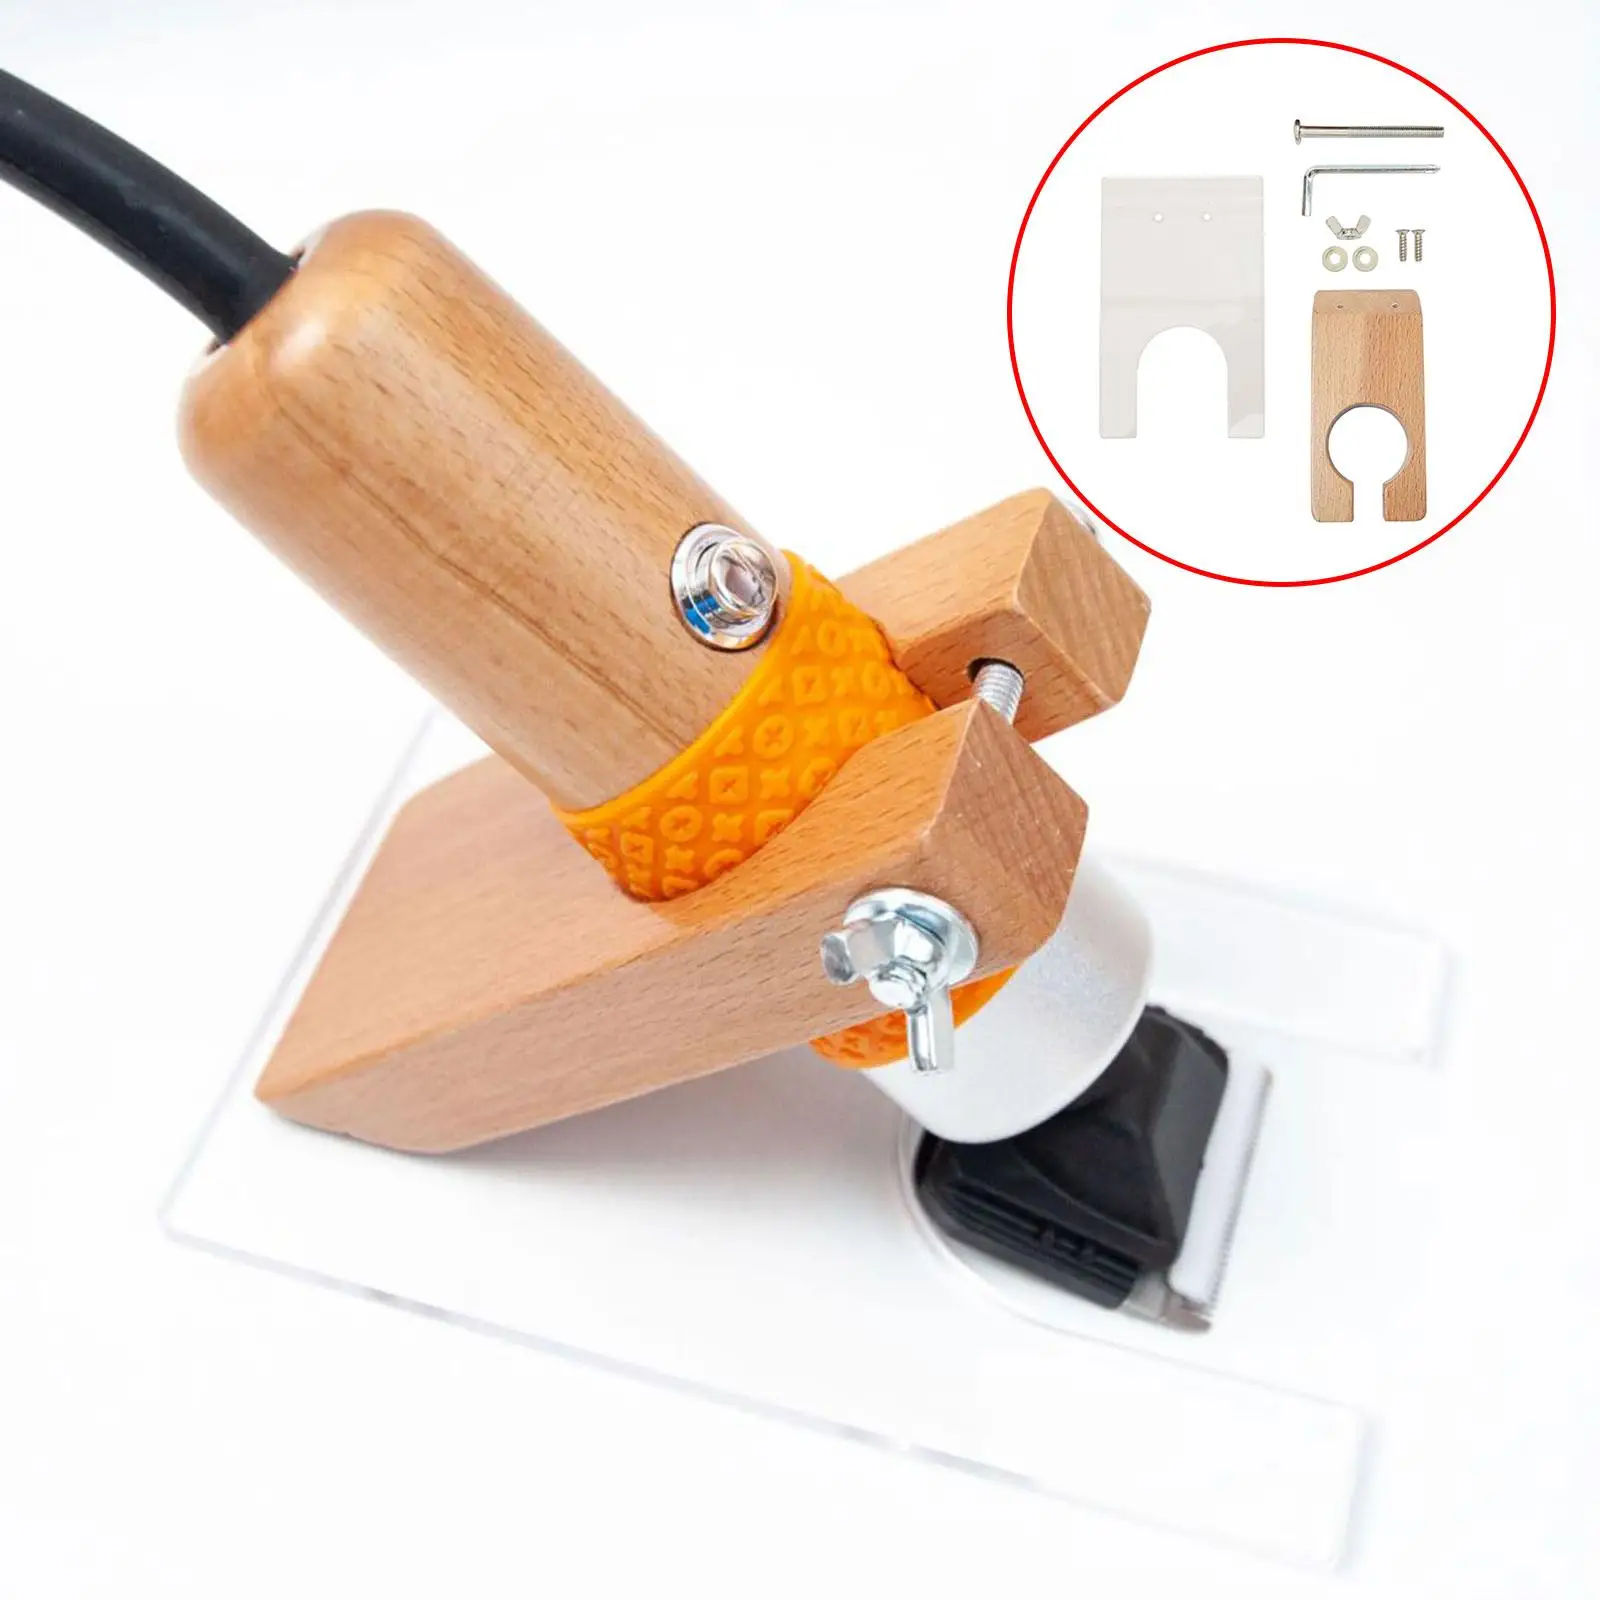 Carpet Trimmer Guide Shearing Guide Attachments Rug Tufting Tool Manual Kit Rug Tufting Carver Base for Tufting Tools Rug Making